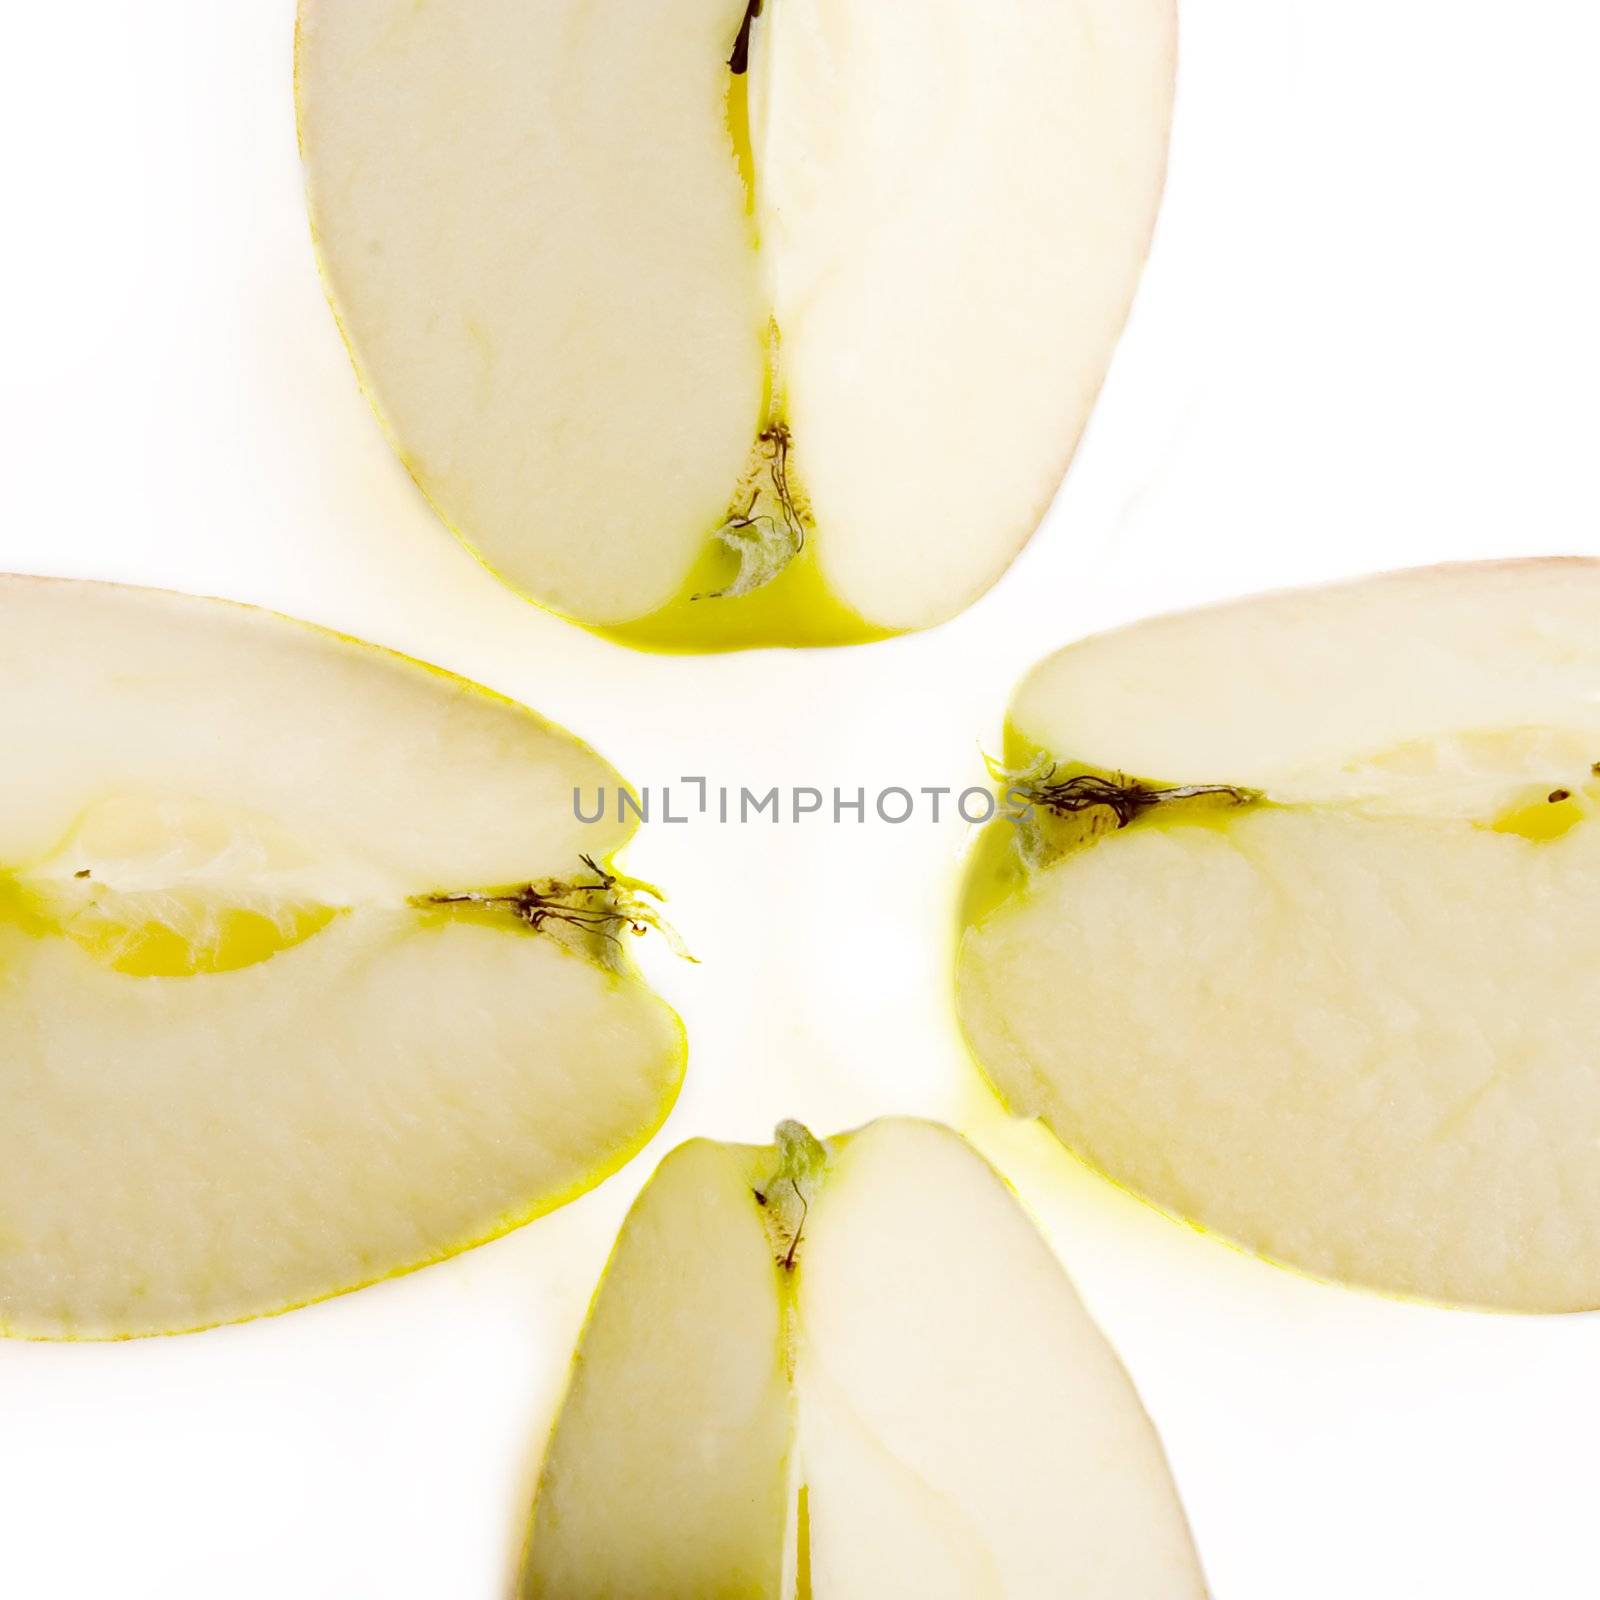 An apple slice in four quarters on a white background